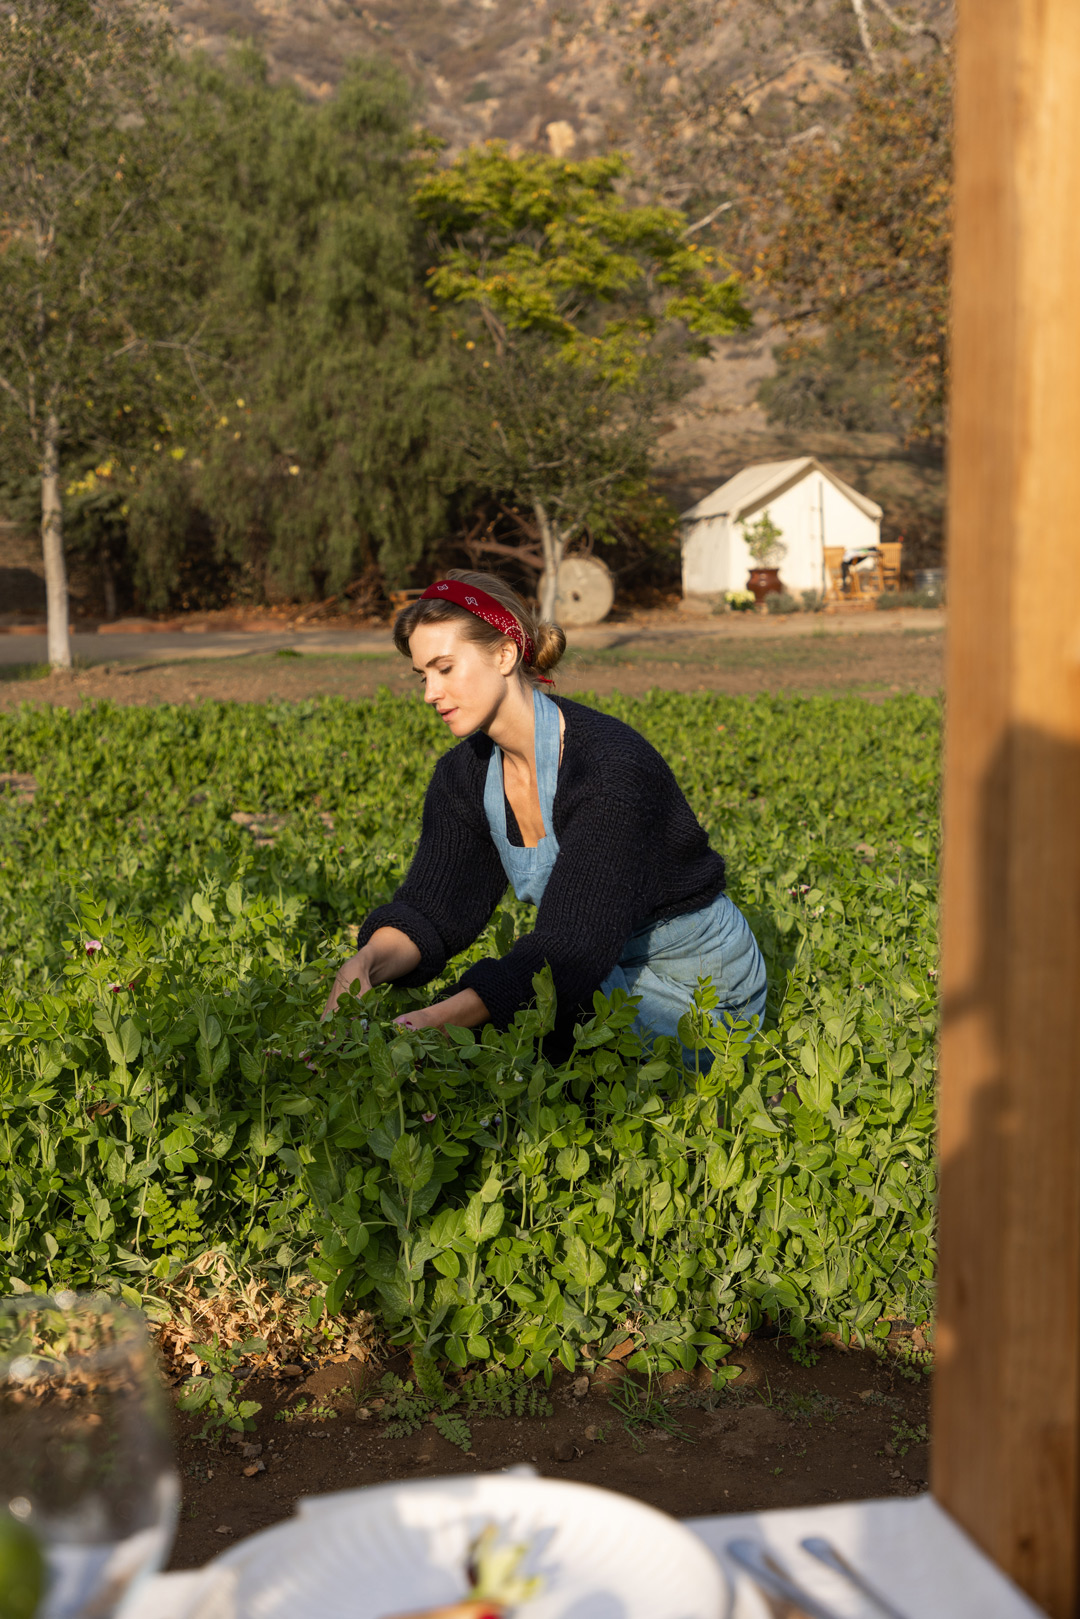 Chef Analise Roland in the garden at Malibu Farms